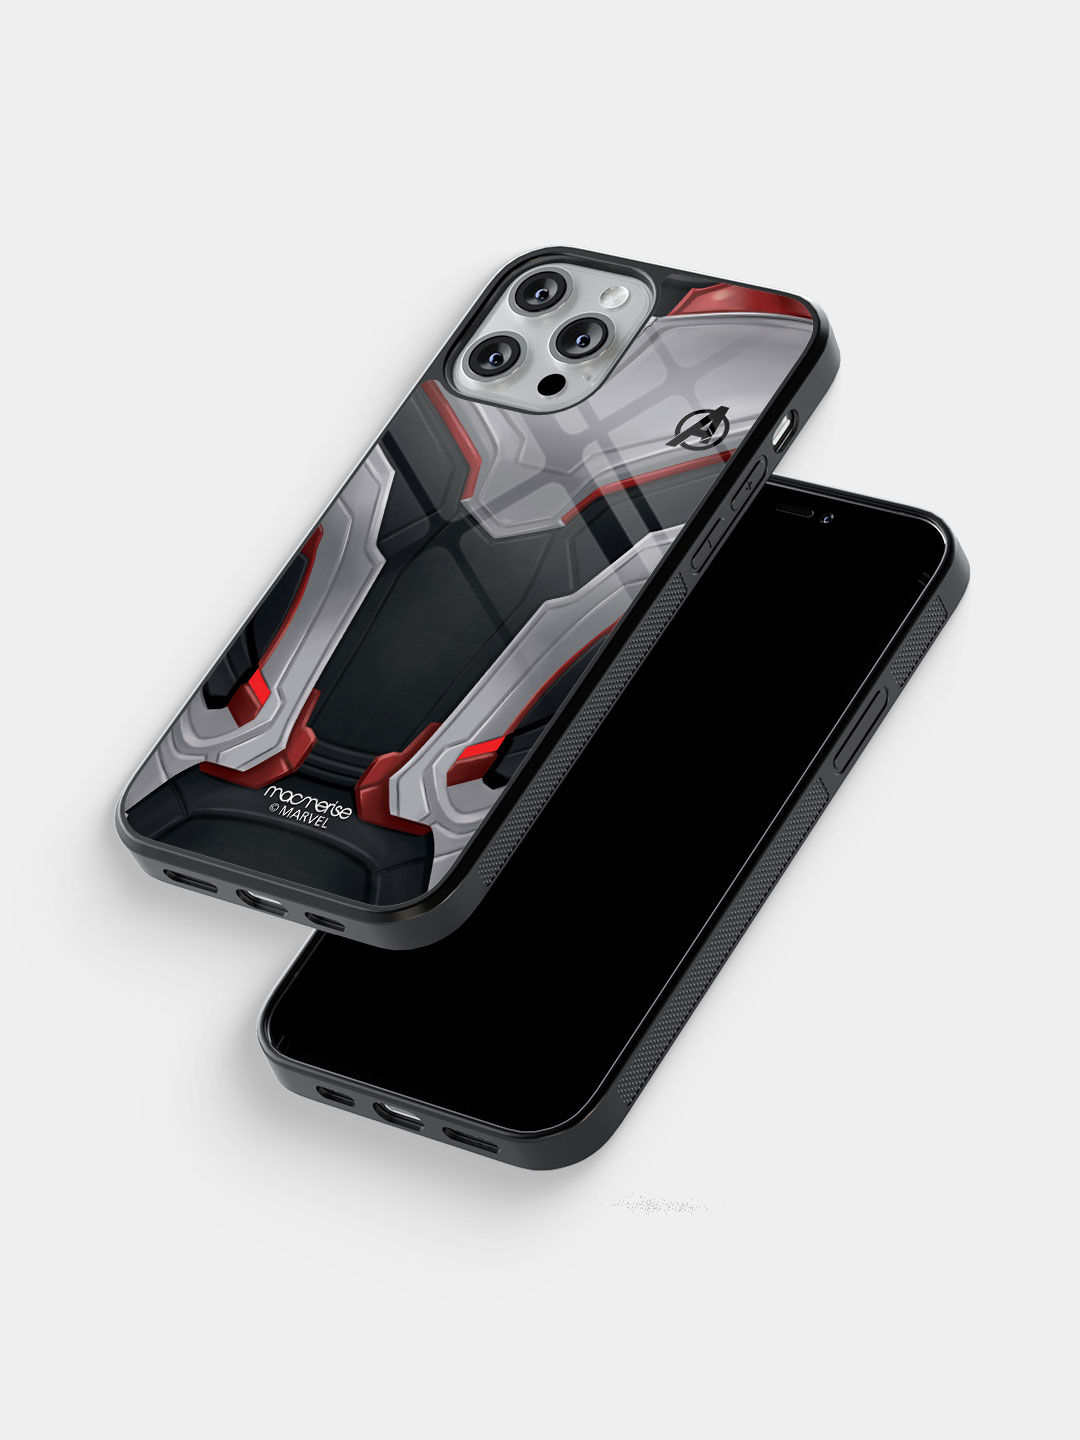 Avengers Endgame Suit - Glass Case For iPhone 13 Pro Max